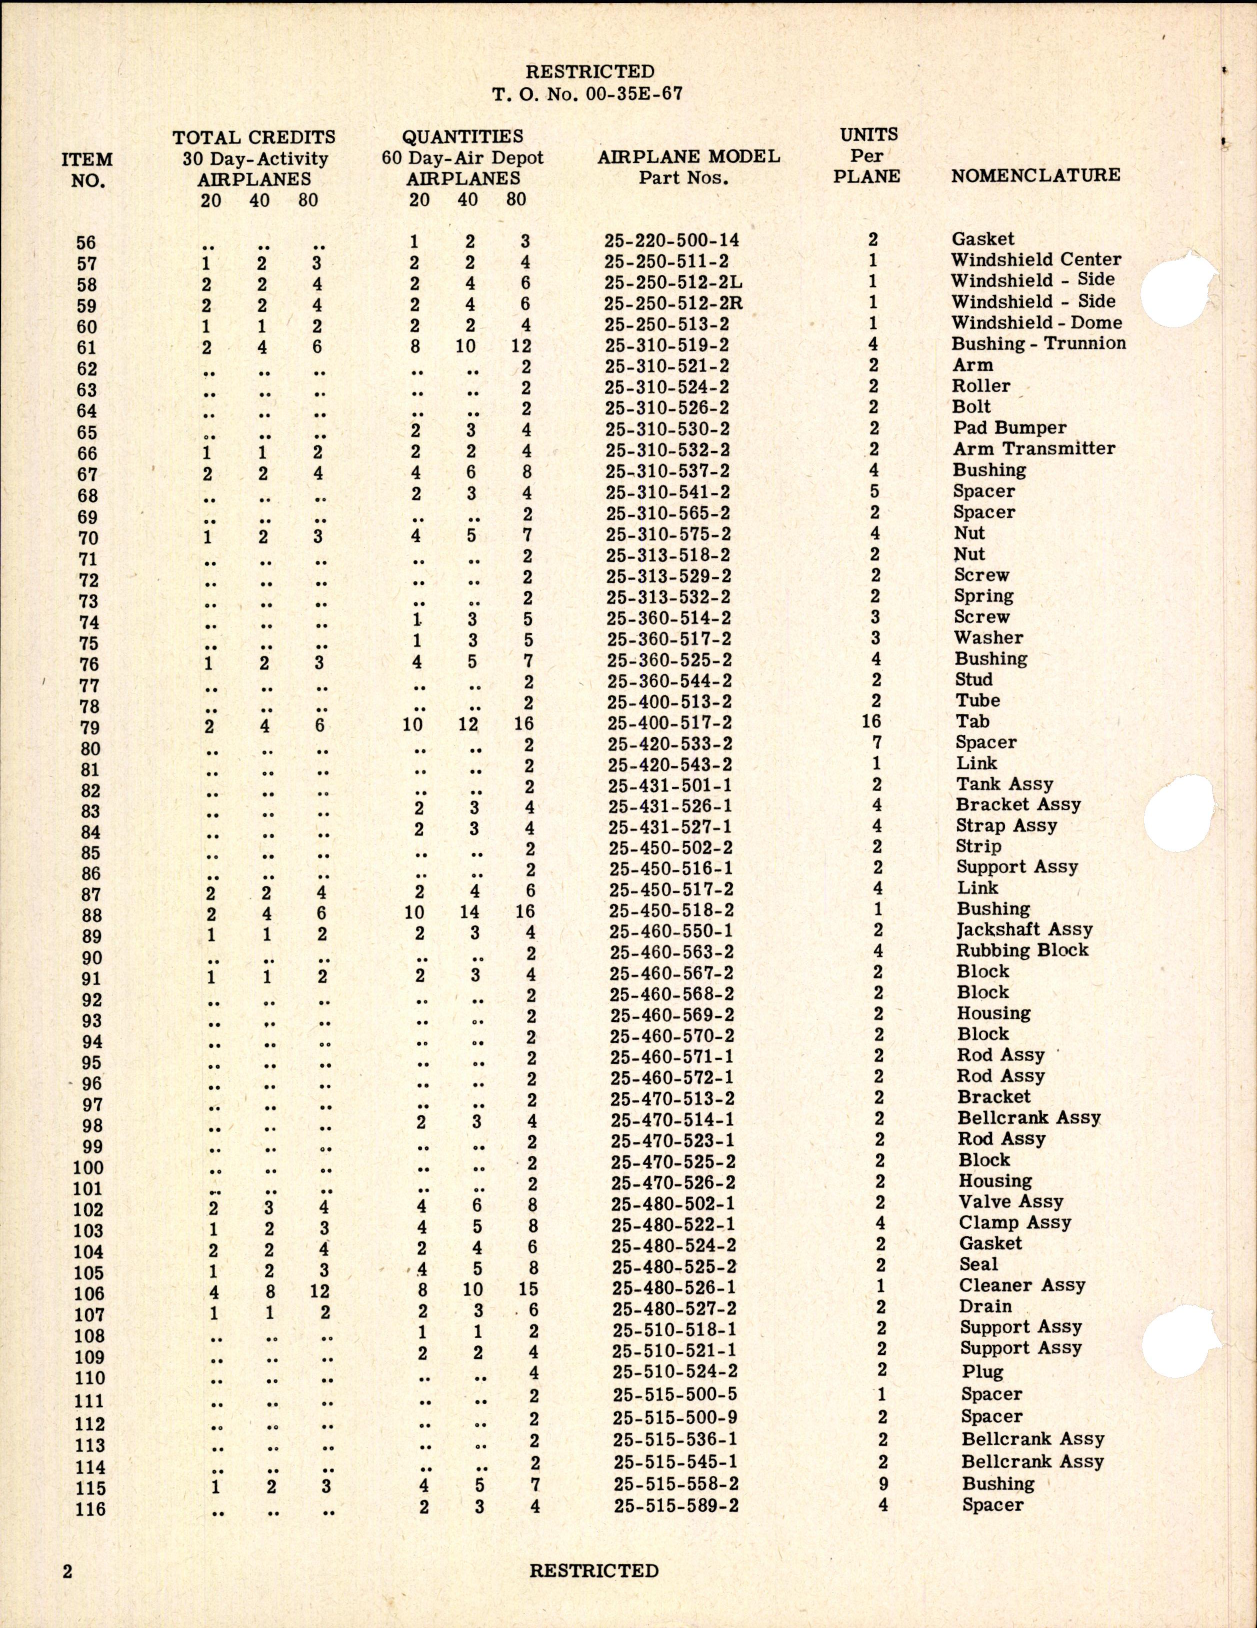 Sample page 4 from AirCorps Library document: Table of Credit - Airplane Maintenance Parts For AT-9 Series